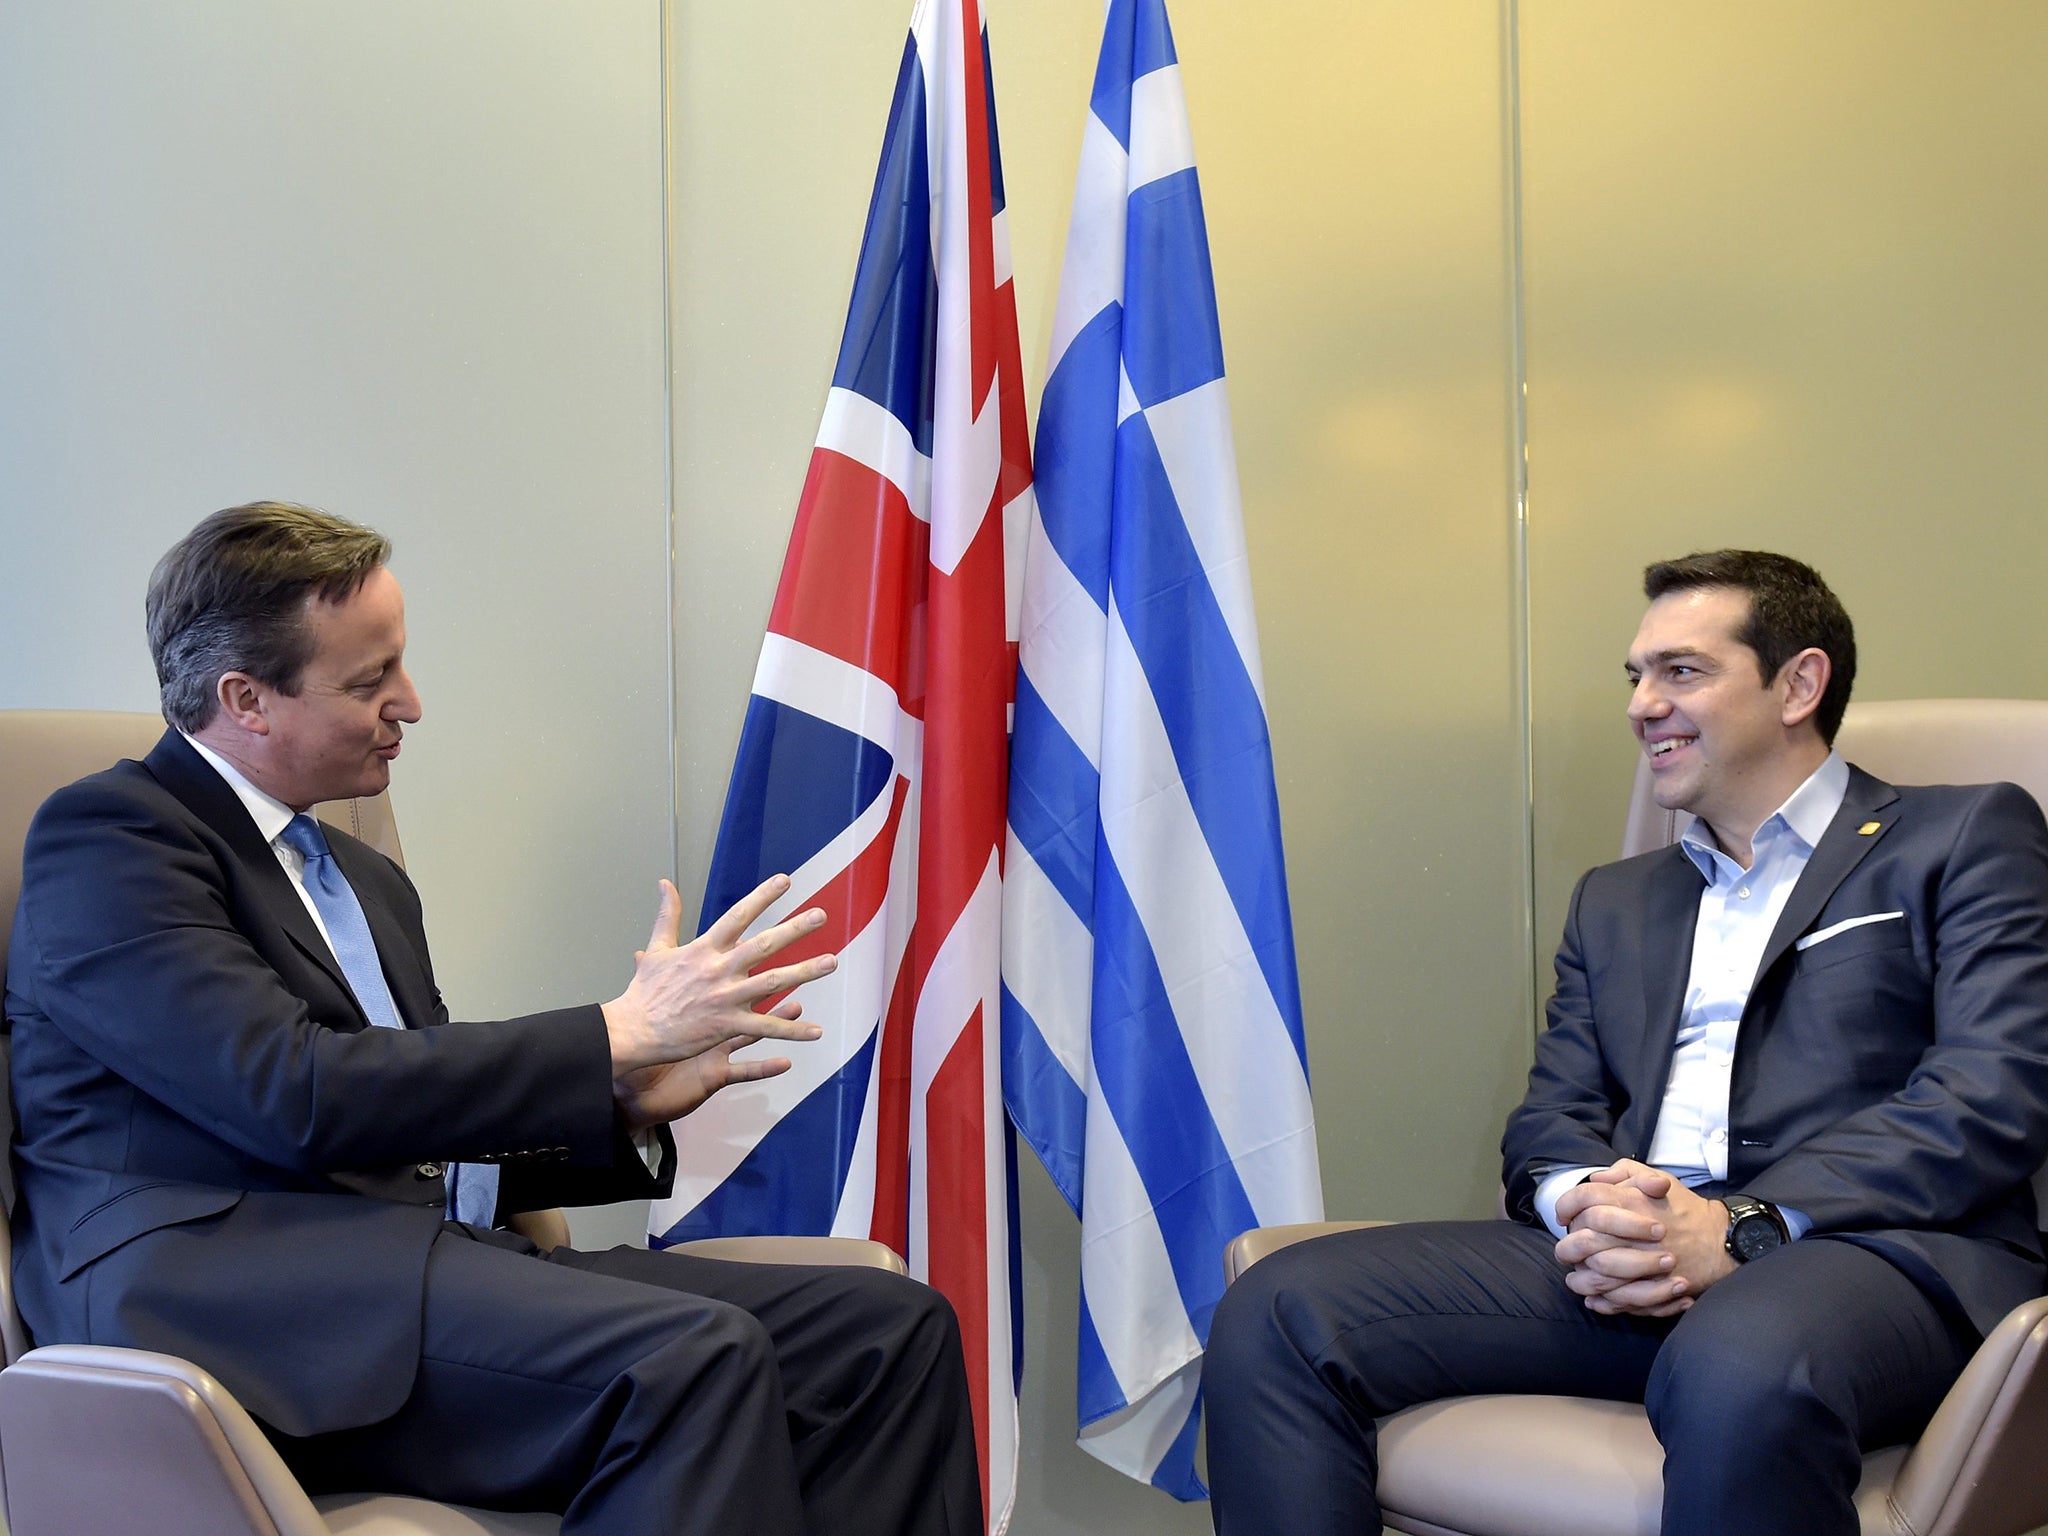 David Cameron and the Greek PM Alexis Tsipras met on the sidelines of the EU leaders summit in Brussels yesterday